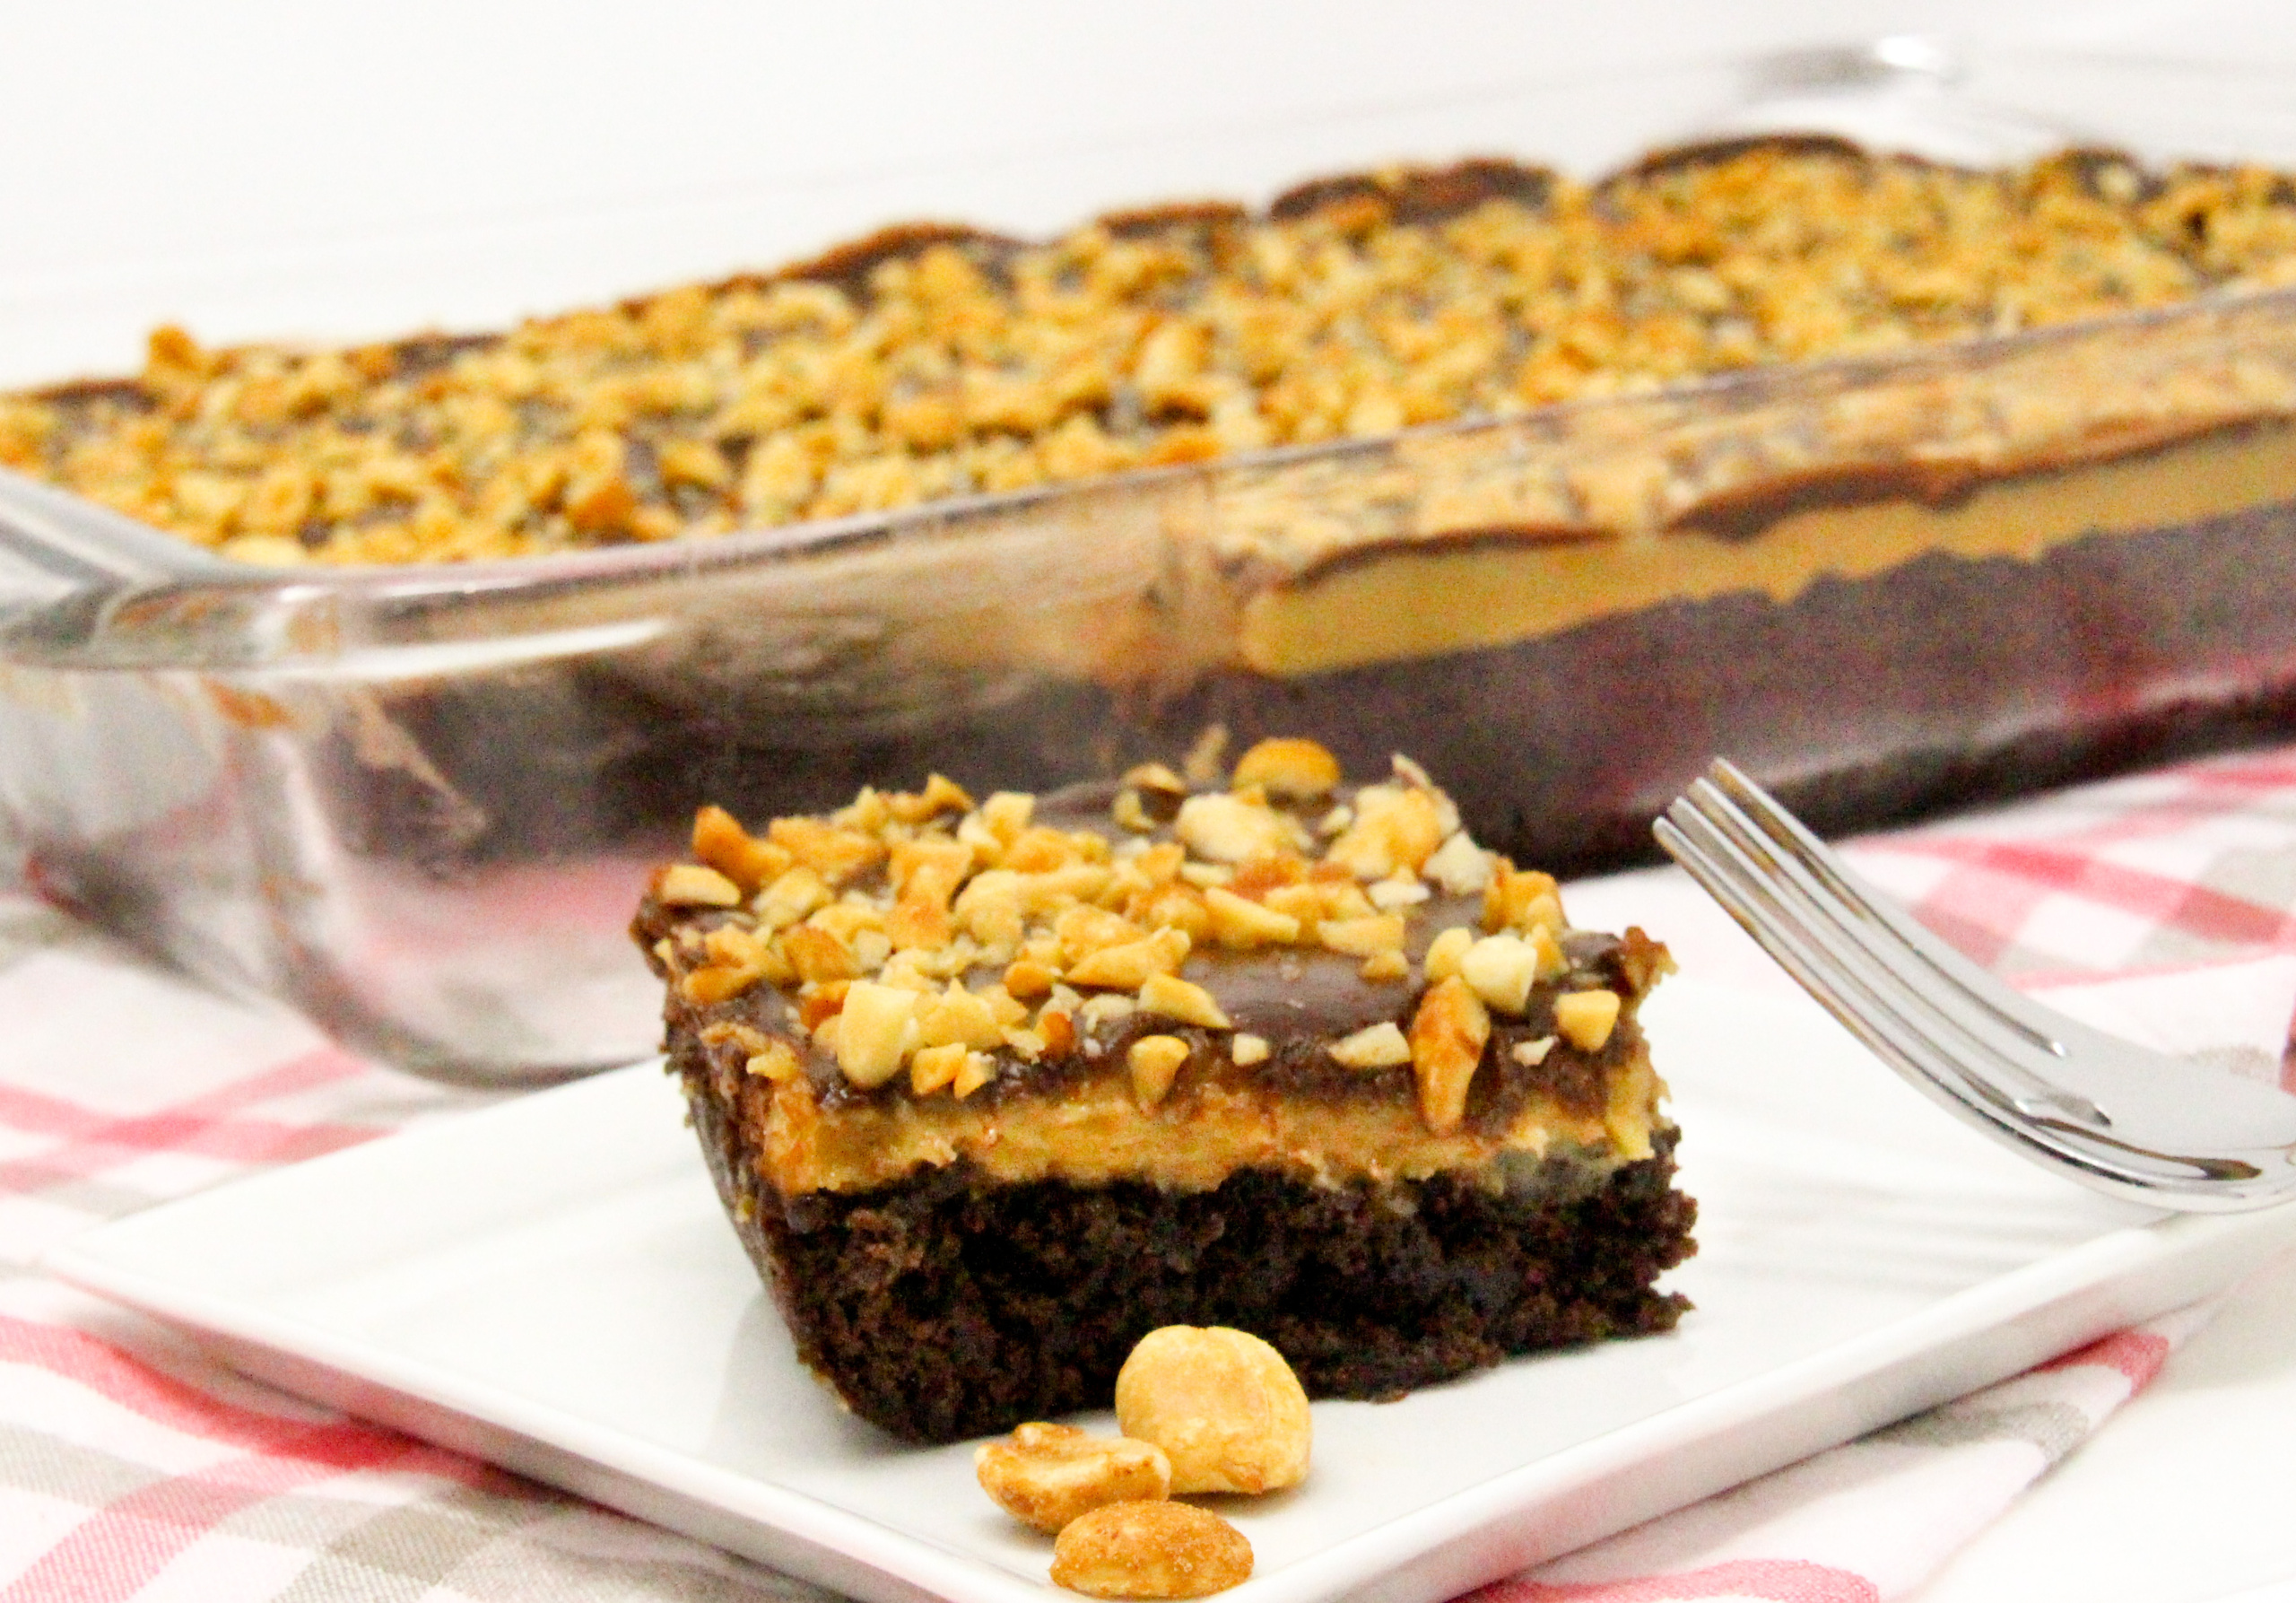 Triple-Layer Peanut Butter Brownies feature a creamy peanut butter filling spread over brownies and then topped with rich chocolate and sprinkled with peanuts. This swoon-worthy concoction makes a large amount to share, which is sure to earn you brownie points from your family and friends! Recipe shared with permission granted by Heather Weidner, author of FILM CREWS AND RENDEZVOUS. 